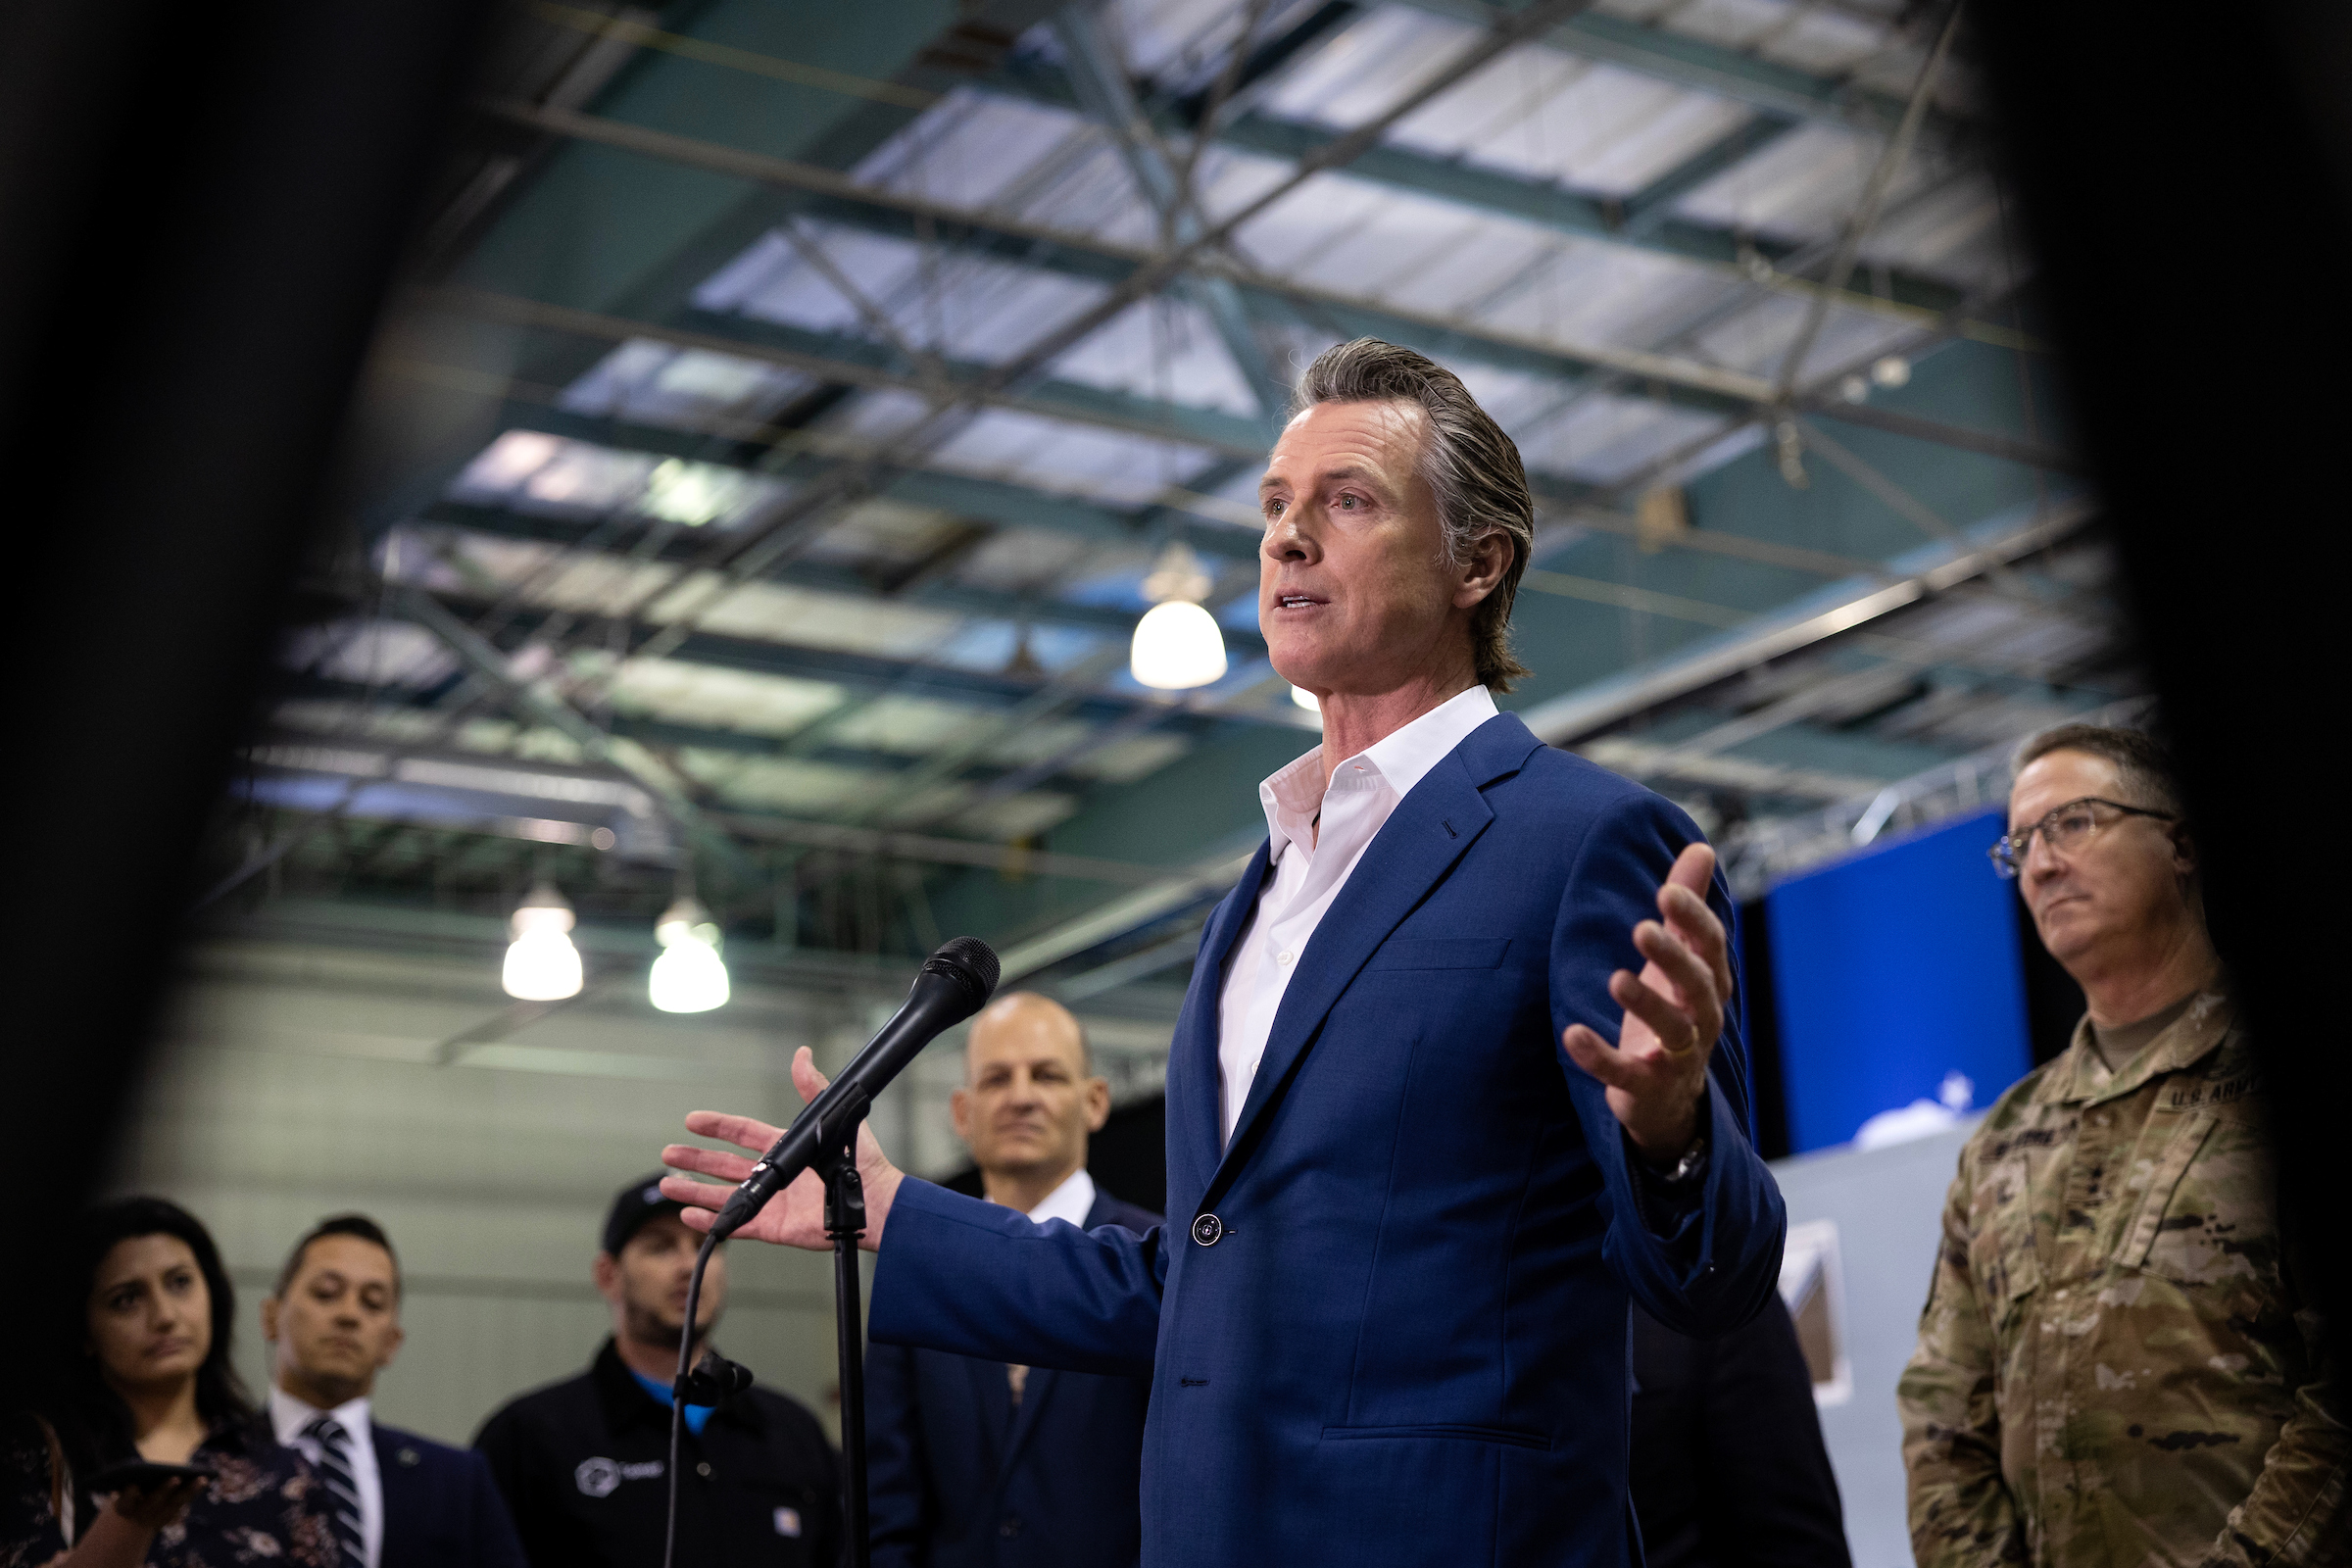 Gov. Gavin Newsom is pictured with his hands out as he speak to many folks in a warehouse in front of a microphone.